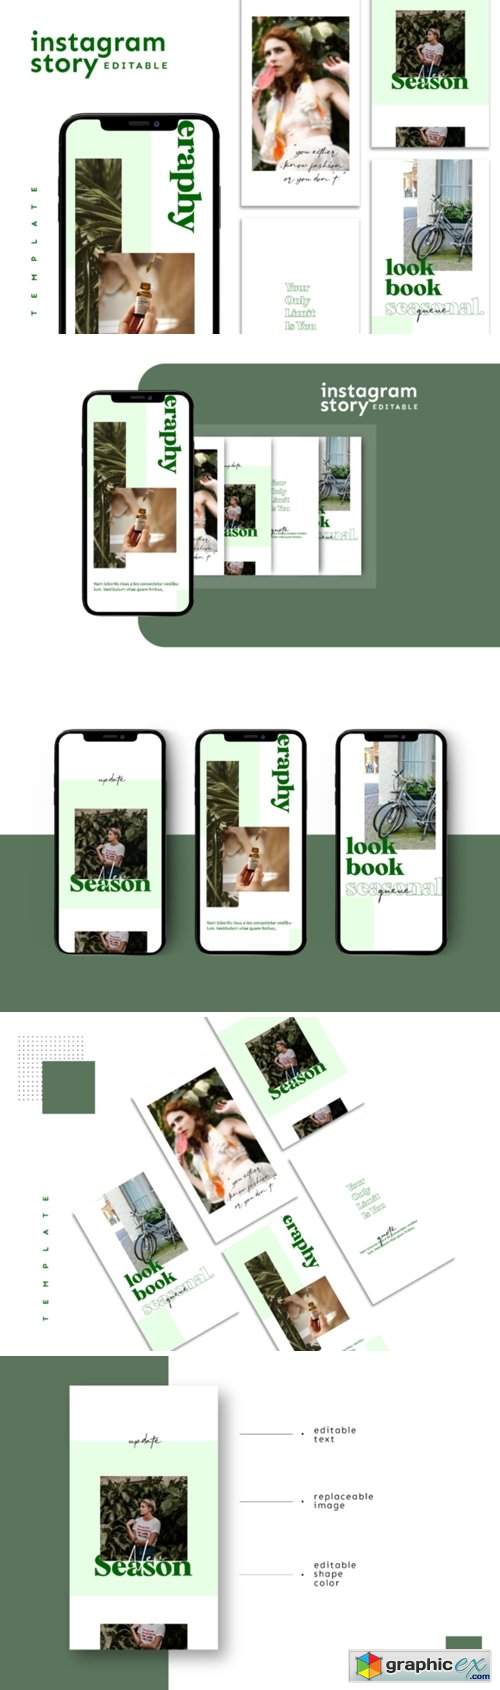  Instagram Story Template 3761602 